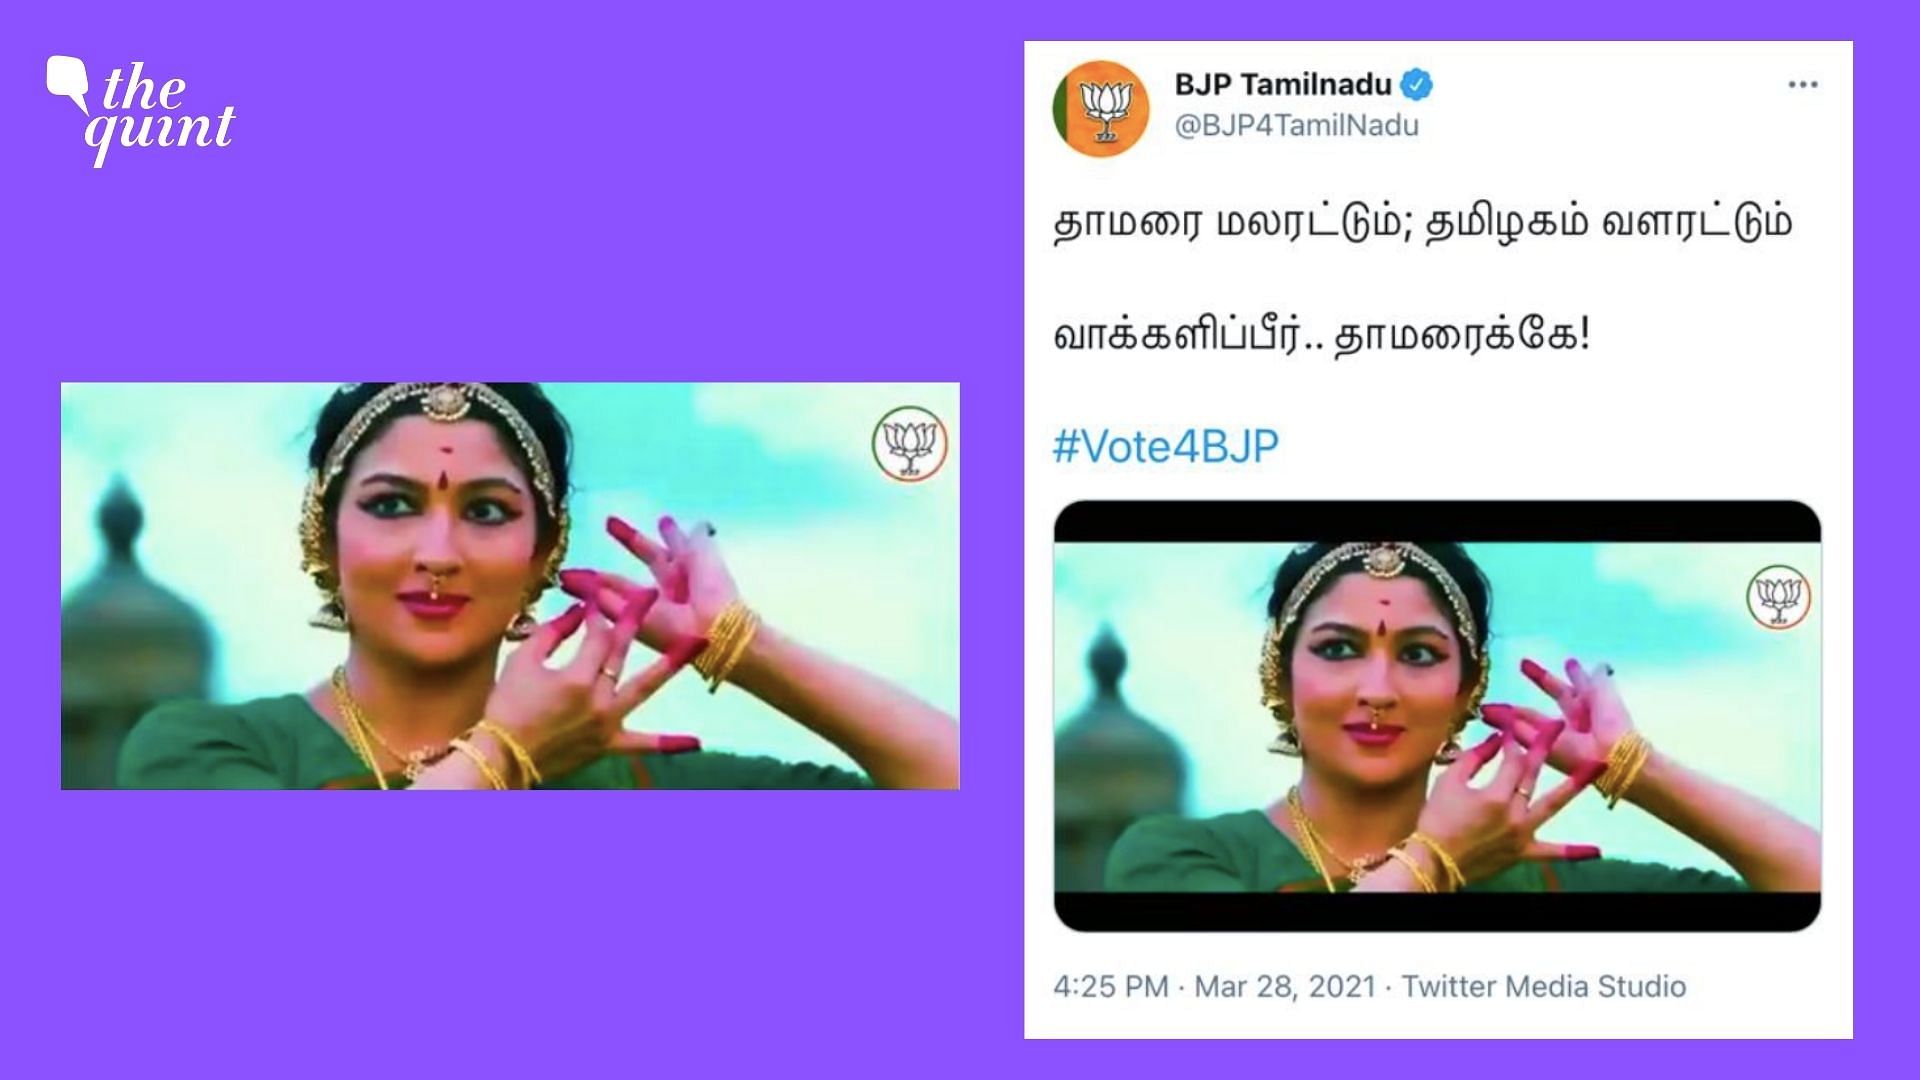 The Bharatiya Janata Party, in a promo video for the upcoming Assembly elections in Tamil Nadu, used a clipping of Bharatanatyam artiste and medical practitioner Srinidhi Chidambaram.&nbsp;